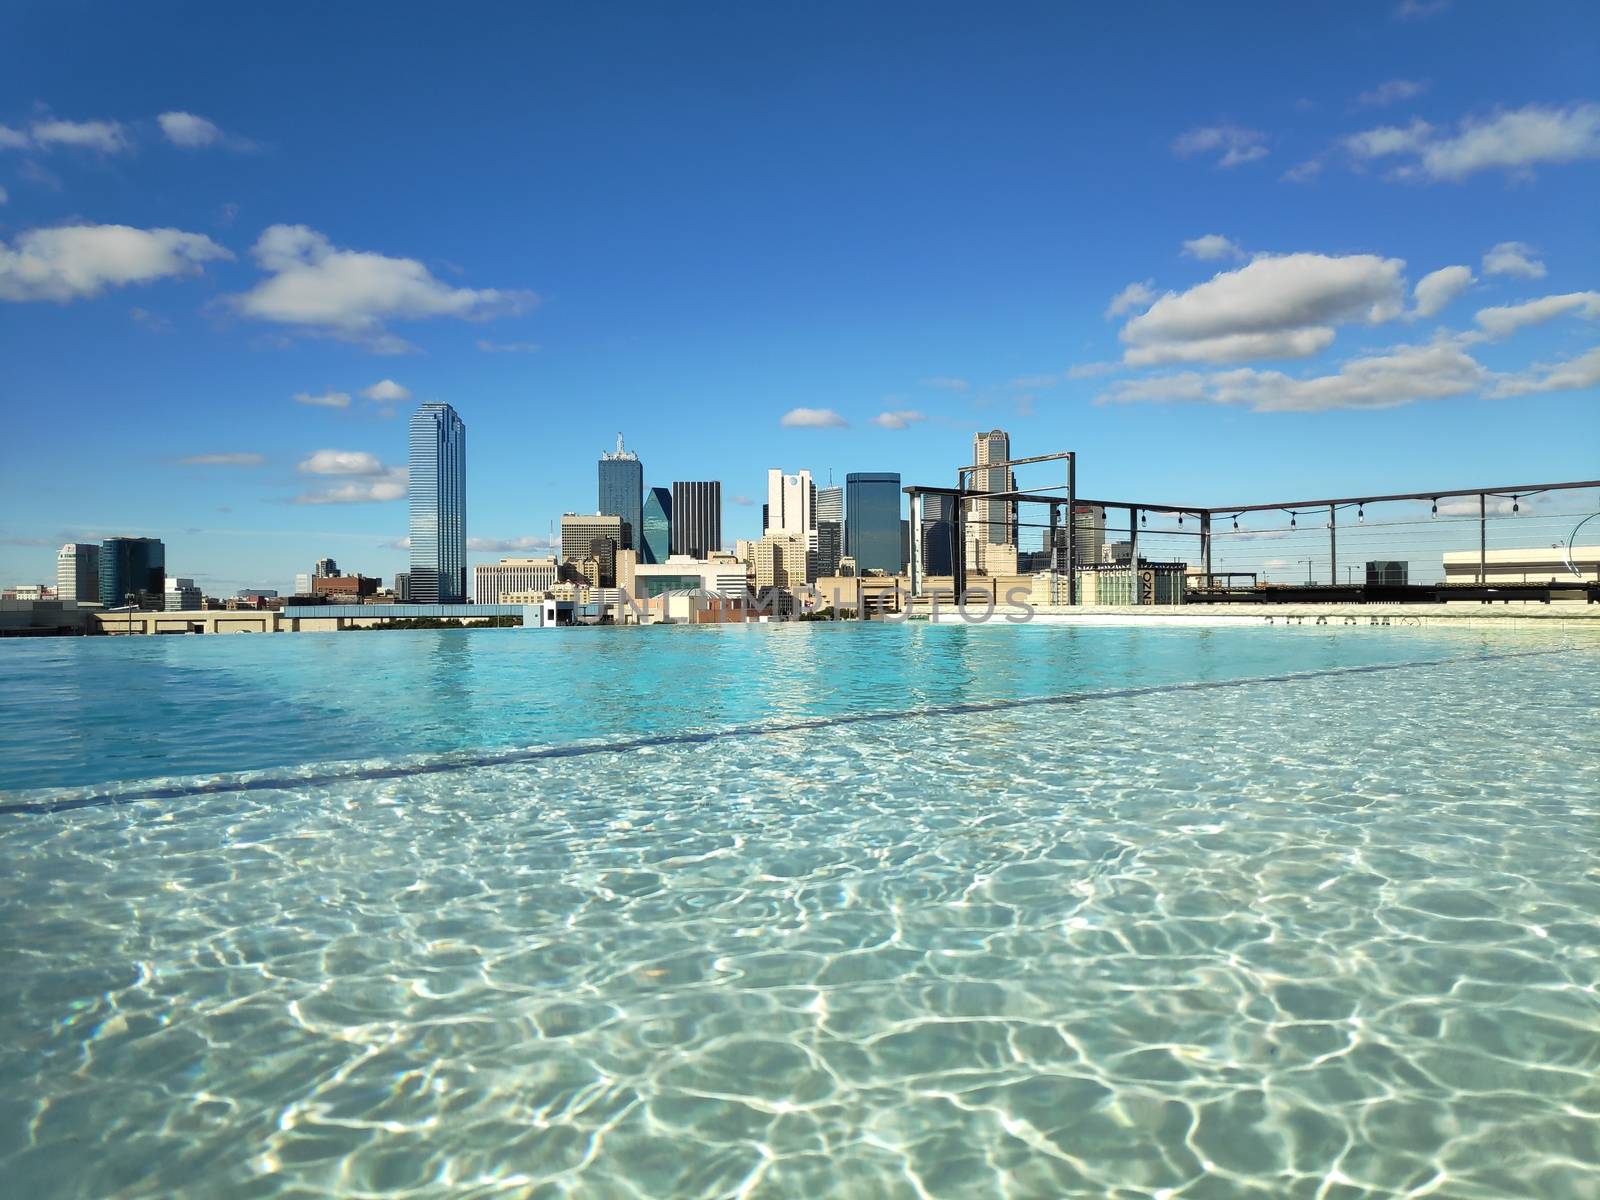 Stunning infinity pool view over the skyline of Dallas, Texas